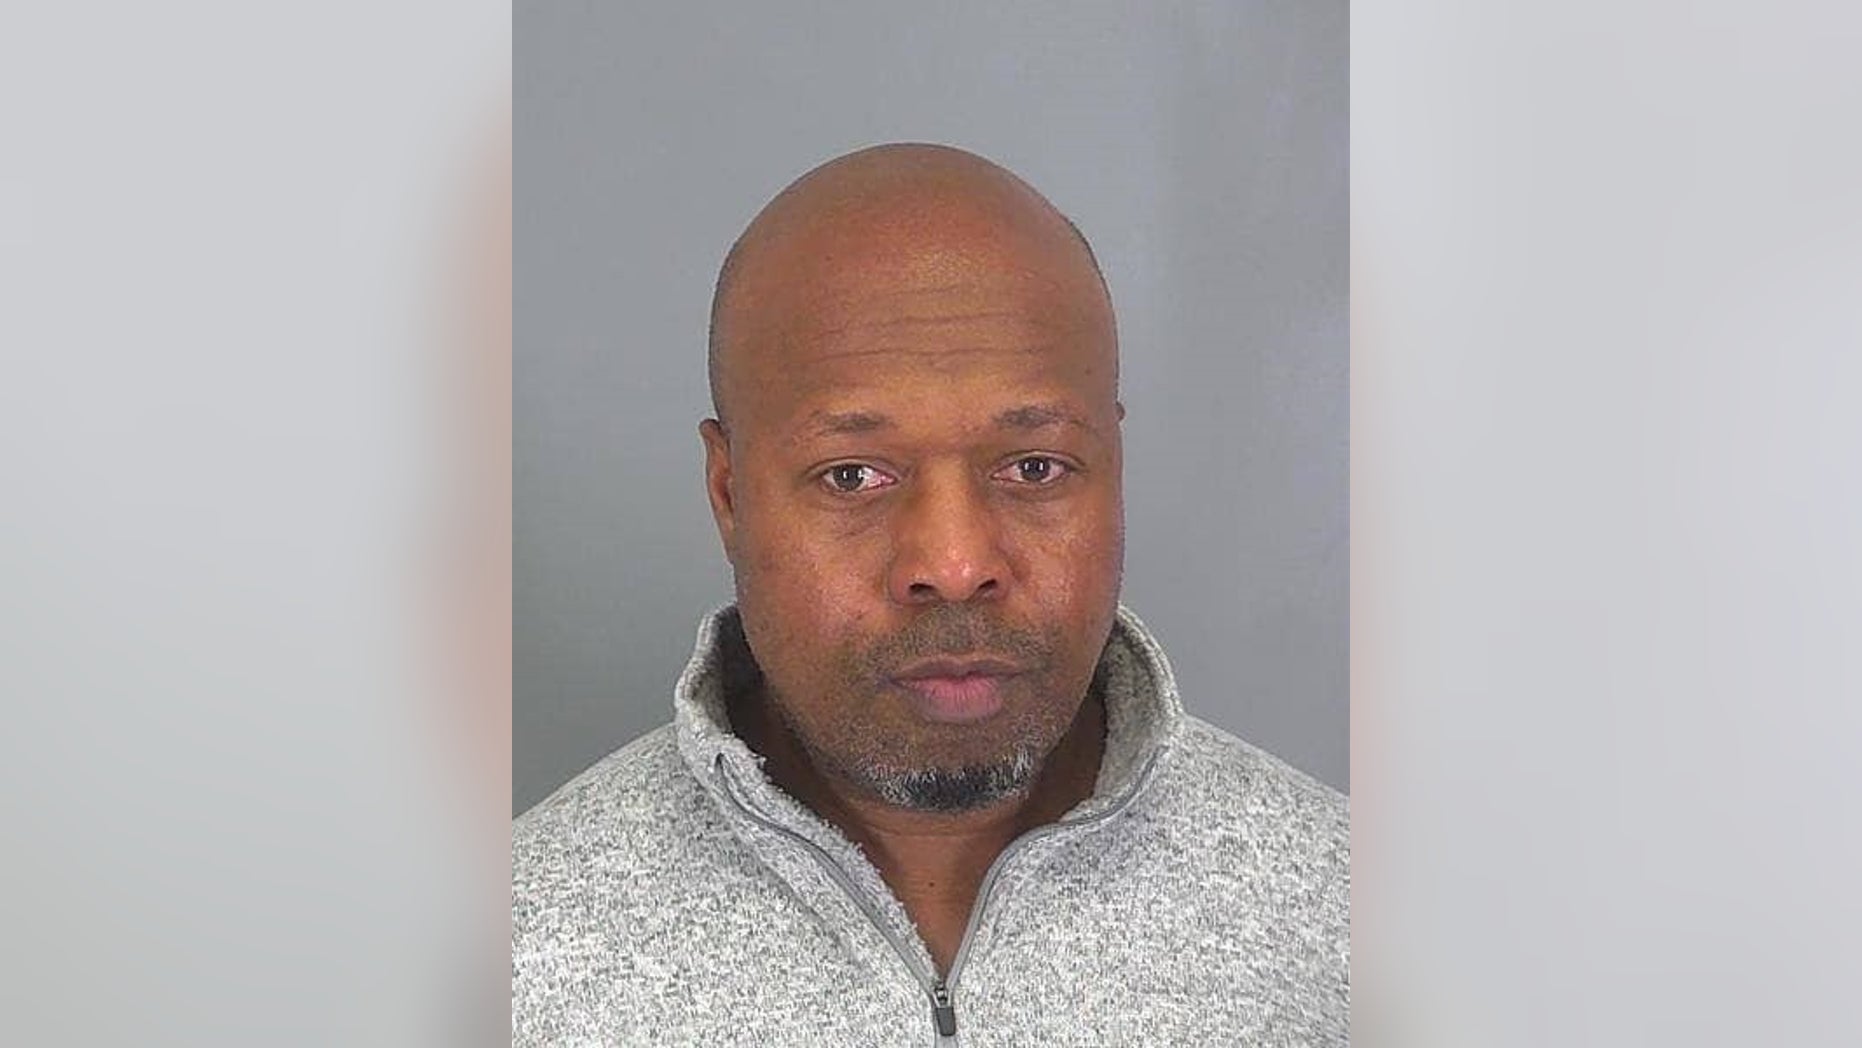 The Spartanburg Police Department has reportedly arrested Gregory Frye, a man accused of raping 12 women between 1995 and 2003.